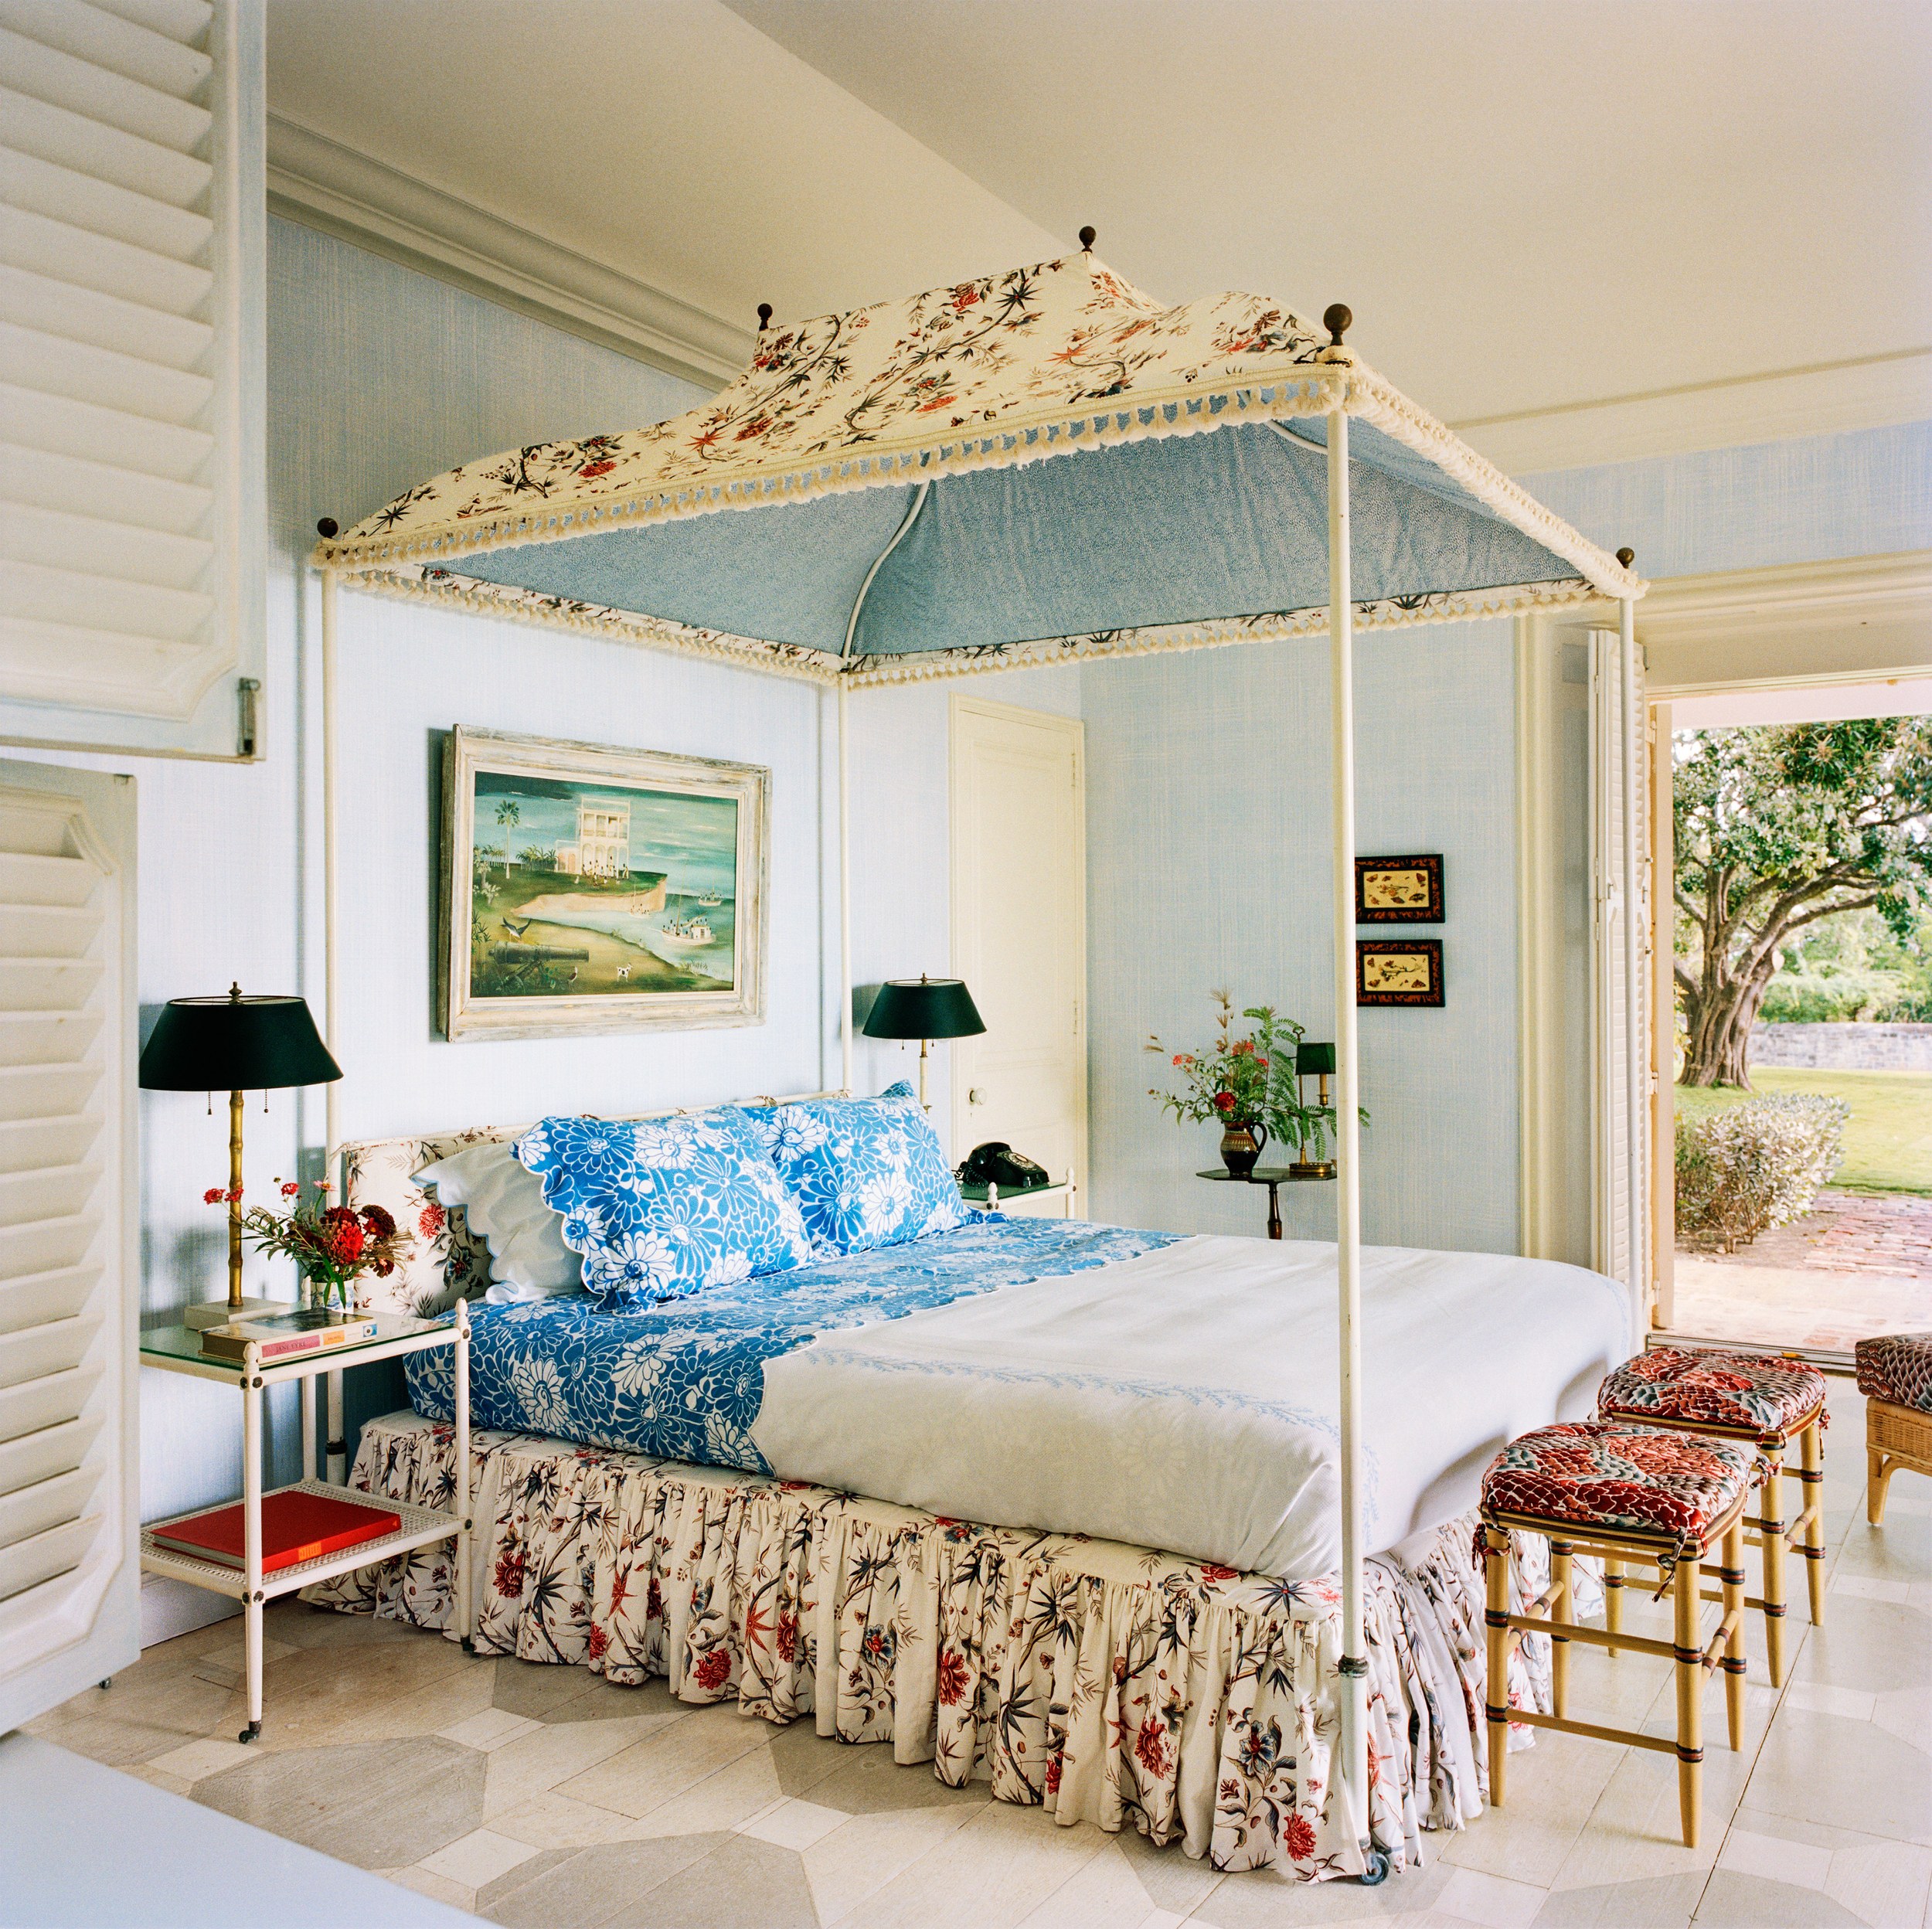 Everything You Need to Know About Tory Burch's Intimate Antigua